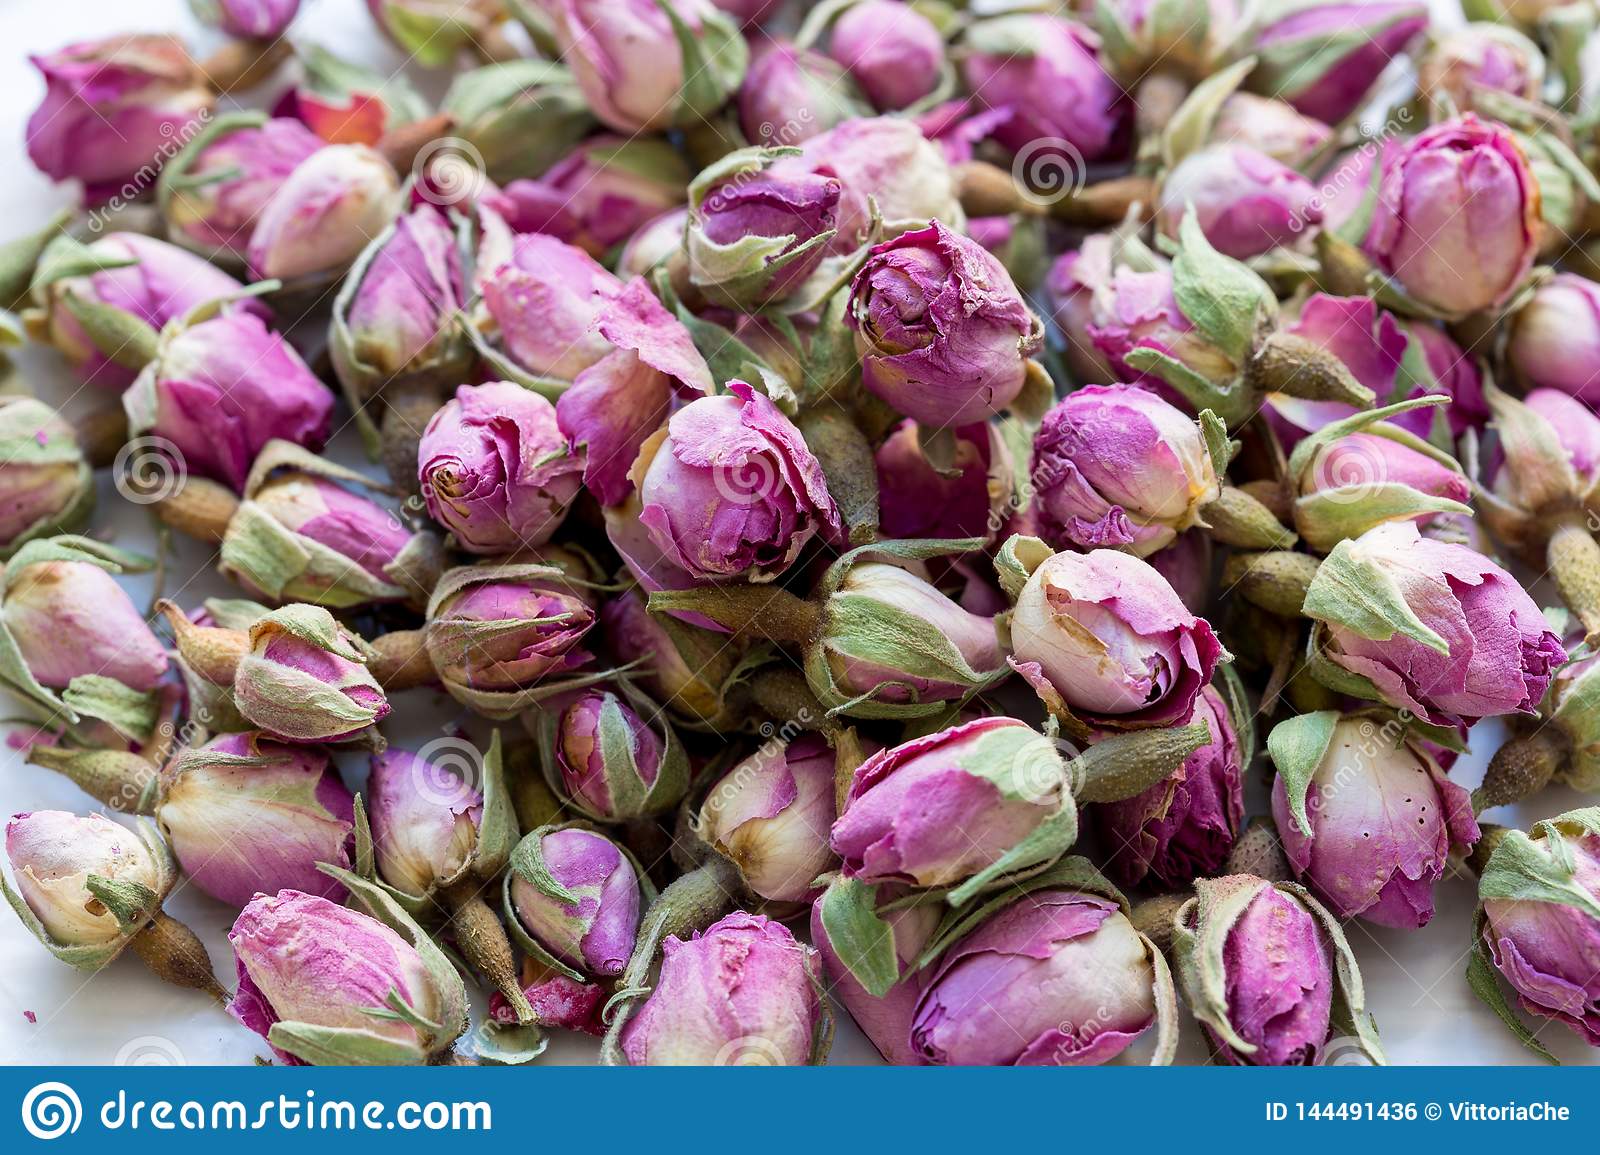 Heap of dried pink rosebuds for tea or aromatherapy rosebud textured flower background stock photo